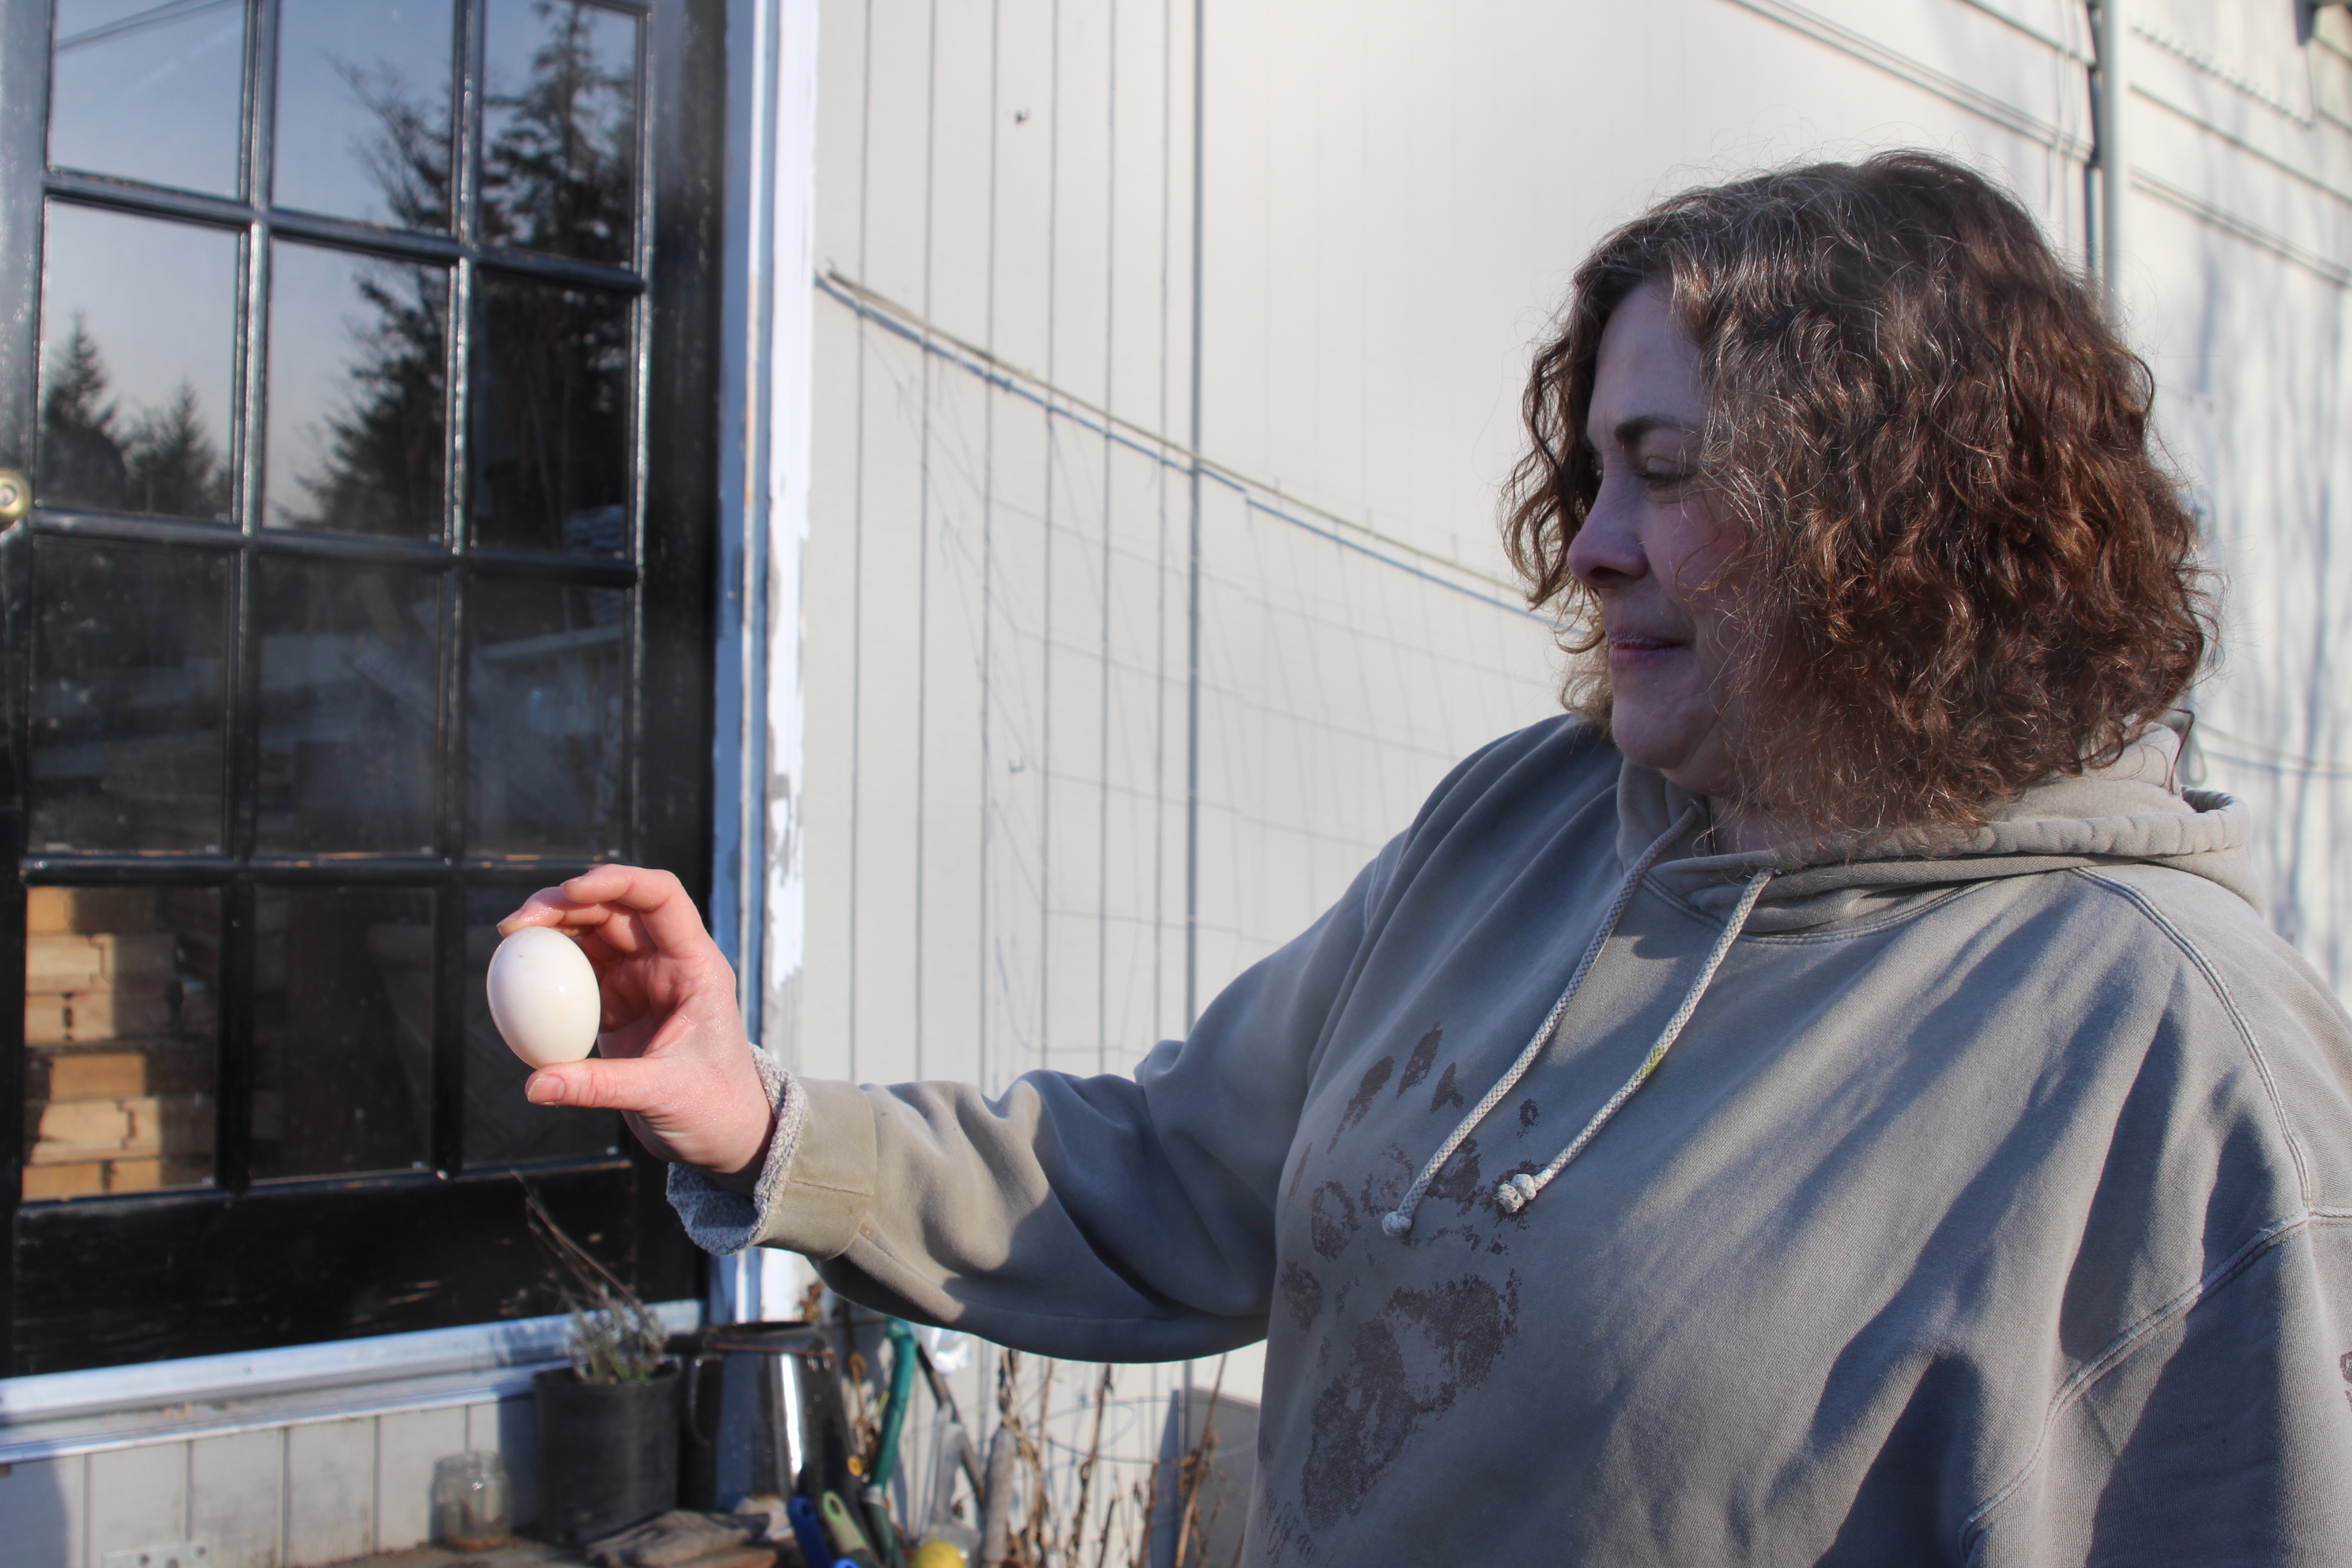 Bobbi Daniels grew up in farm country in Indiana. She's bringing her agricultural knowledge to Sitka, operating the Sawmill Farm since 2001. (Emily Kwong, KCAW - Sitka)